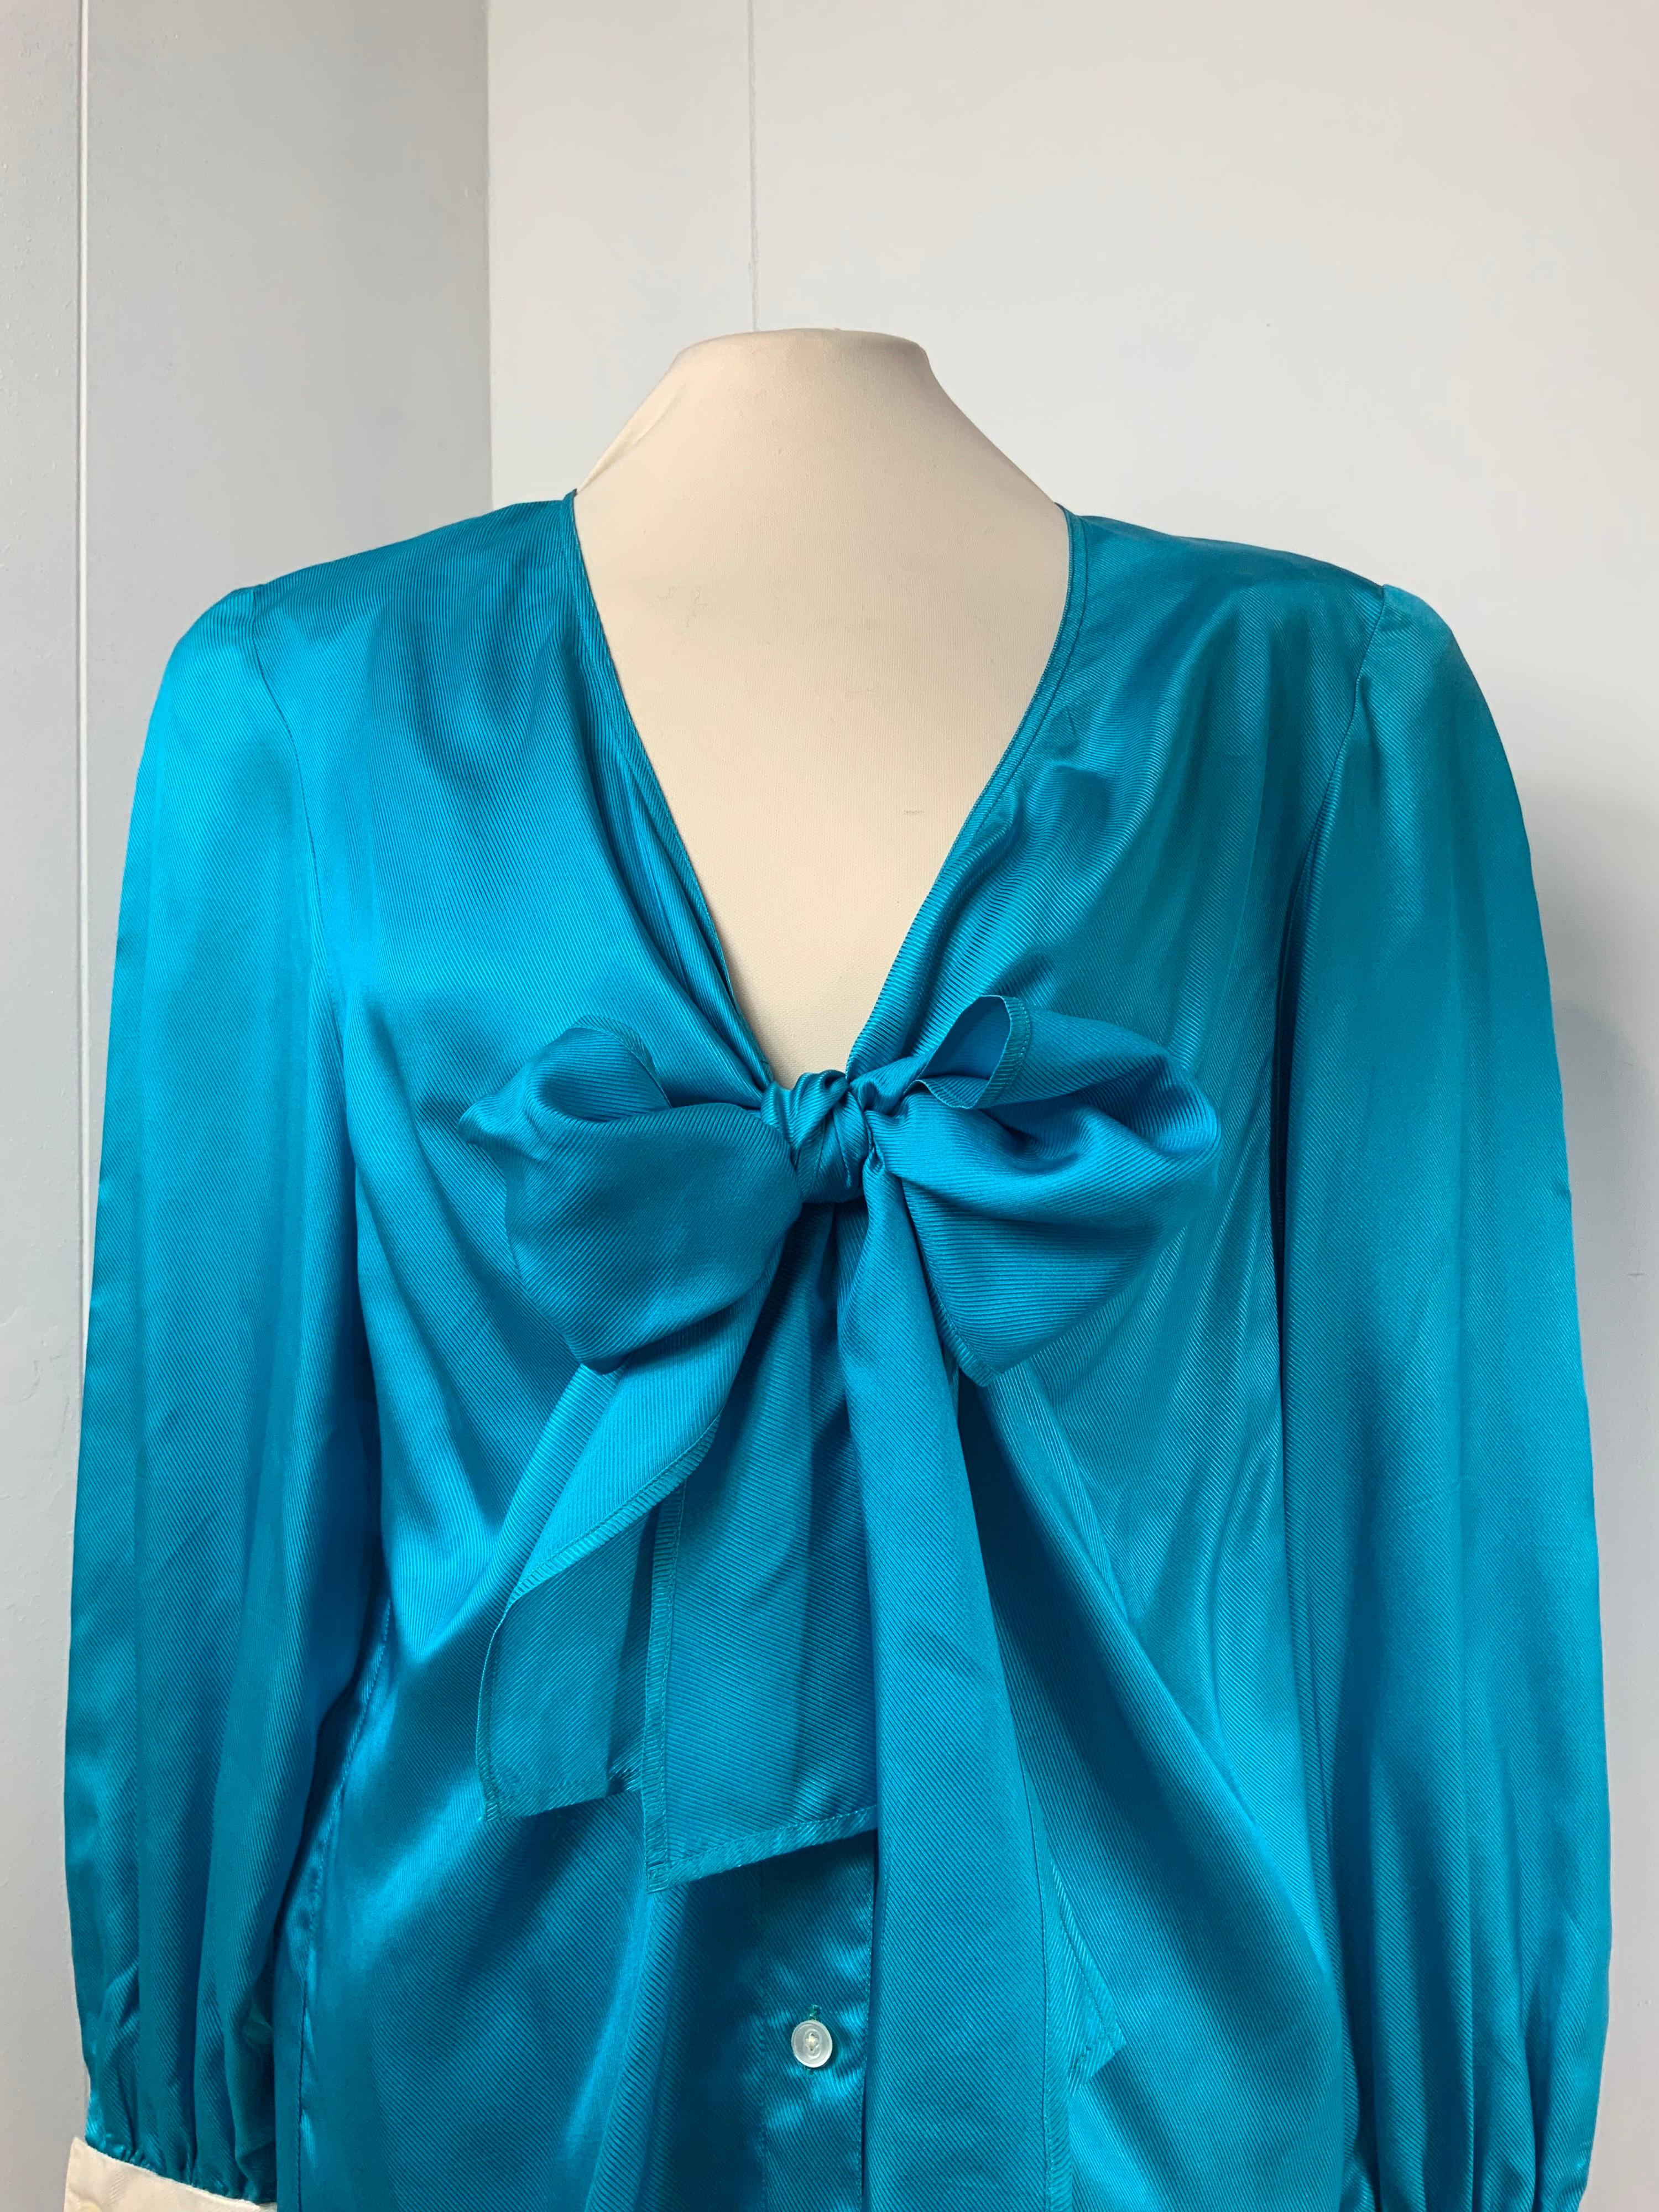 Gucci vintage shirt. About 80s
100% silk. Branded buttons. 
Amazing bow that embrace the neckline.
Featuring padded shoulder. 
Size 42 Italian. 
Shoulders 48 cm
Bust 50 cm 
Length 70 cm 
sleeves 62 cm 
Conditions: Excellent- Previously owned, like